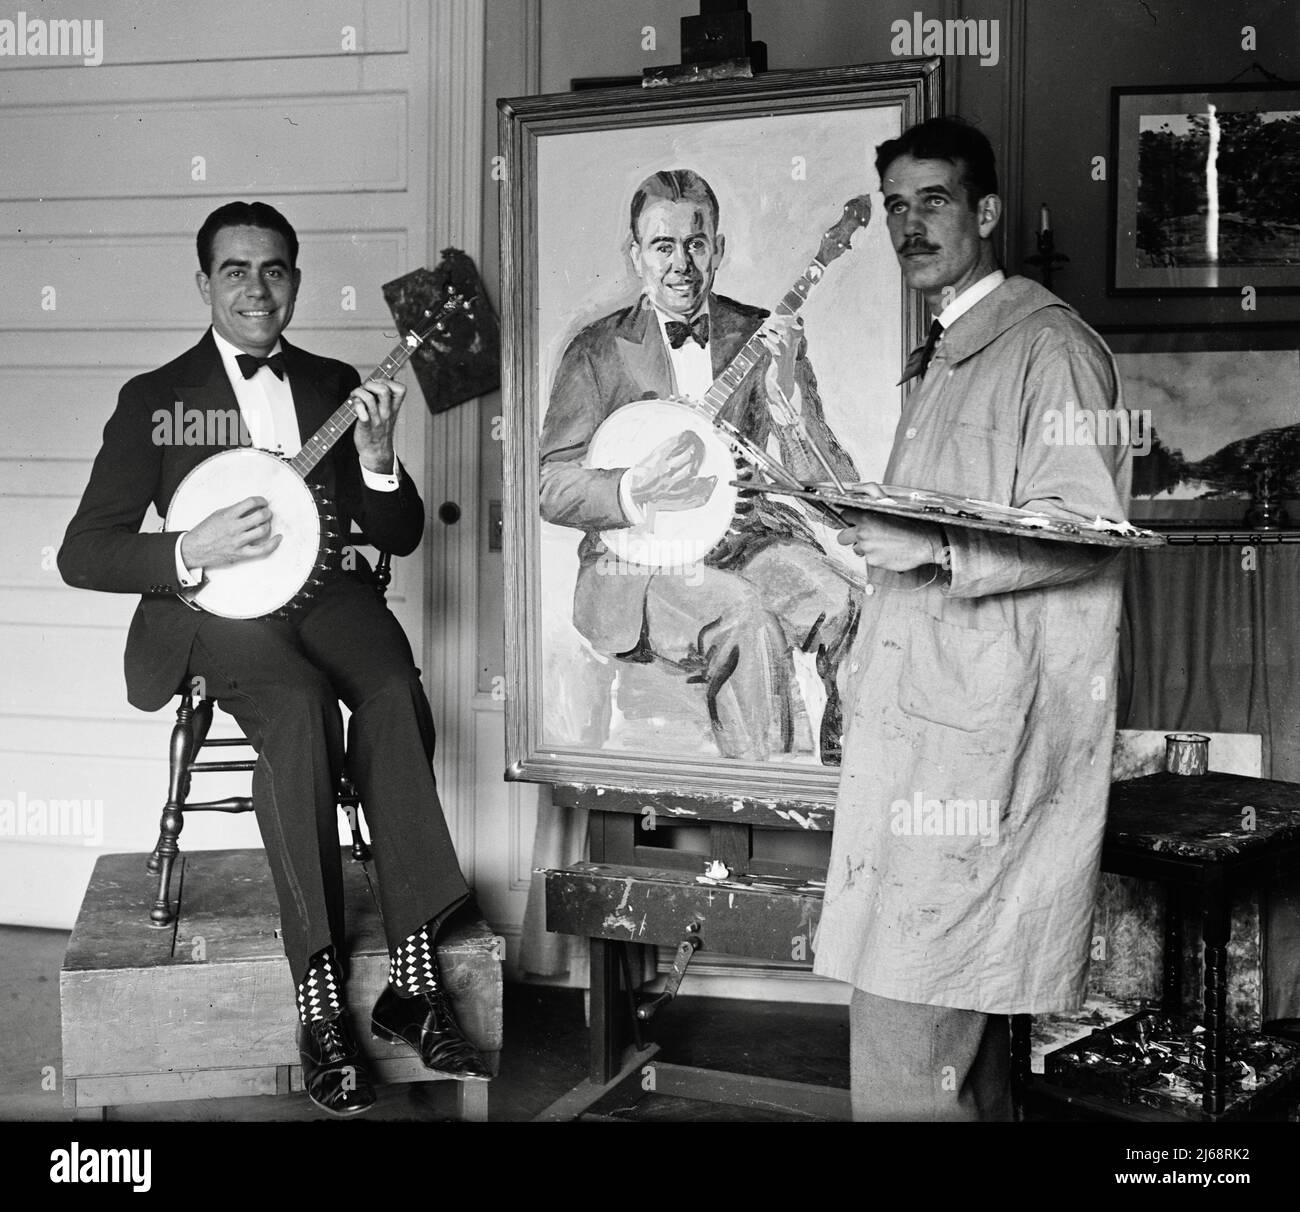 Artist Painting a Man with a Banjo - 1924 Stock Photo